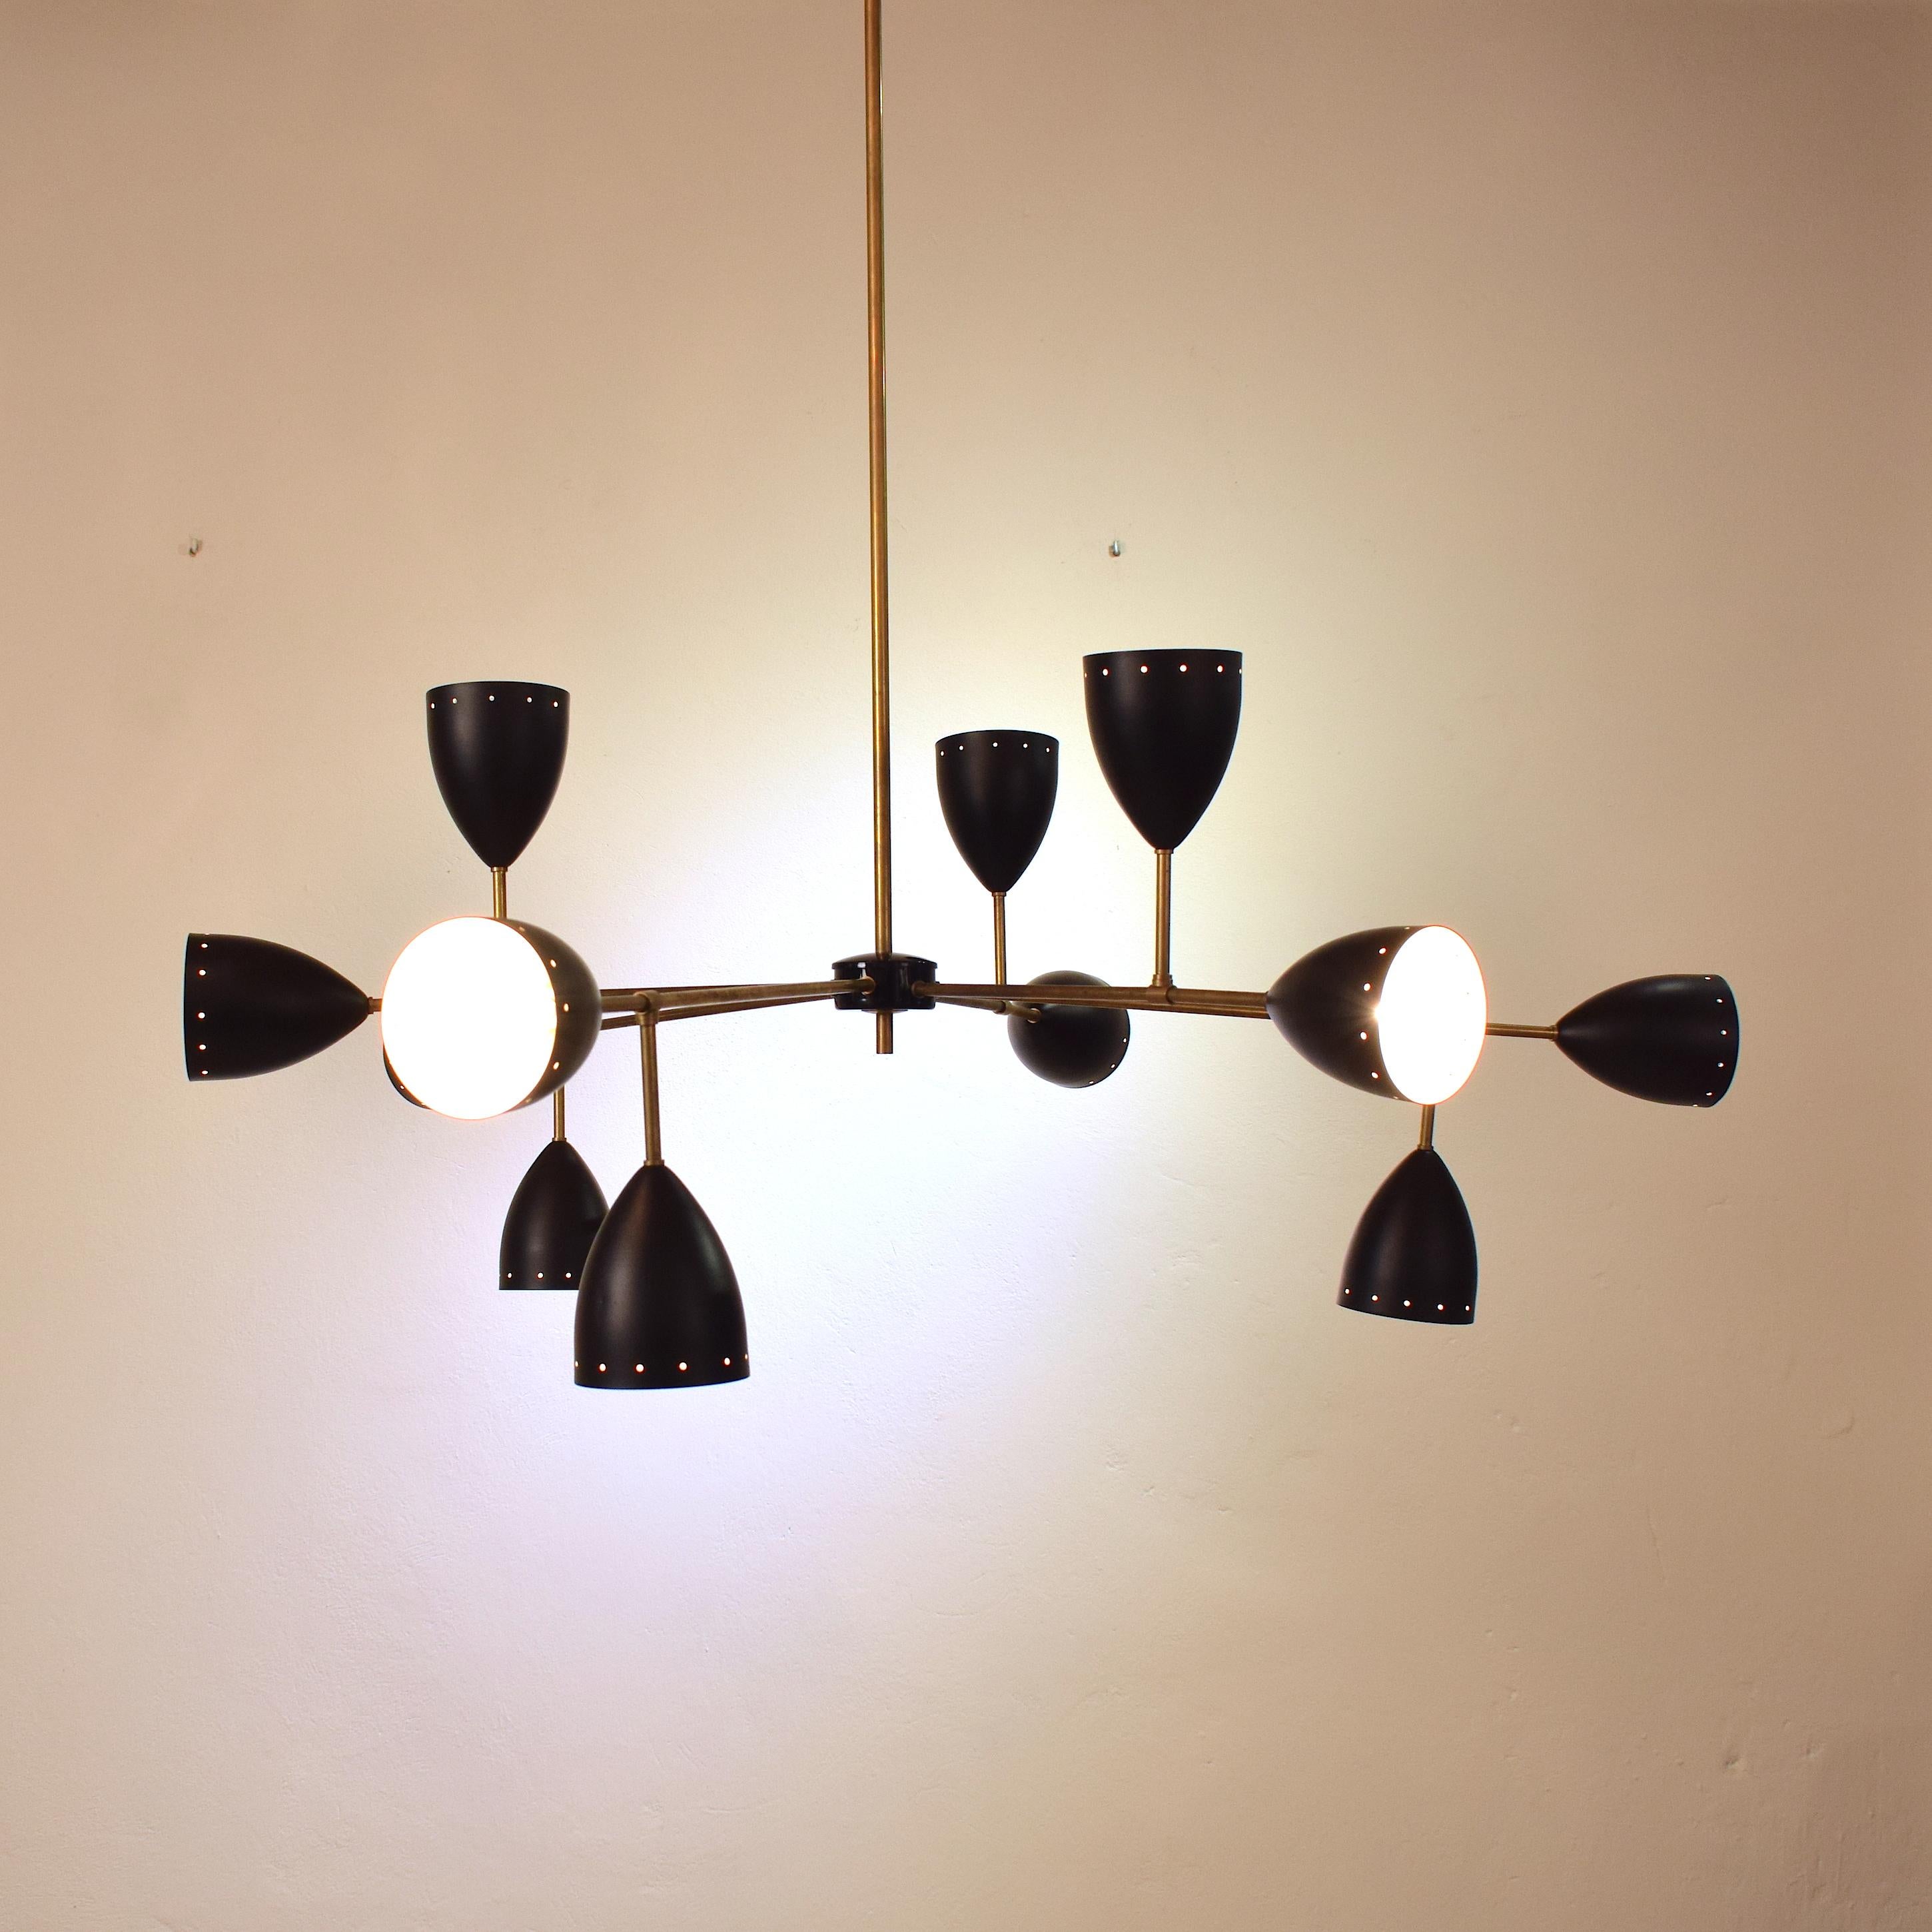 This large Stilnovo style chandelier is very extraordinary. The large scale-brass and black metal lamp shades are going in different directions.
It is crafted in Italy in the style of Stilnove from the 1950s.

The chandelier also works in the US.

A